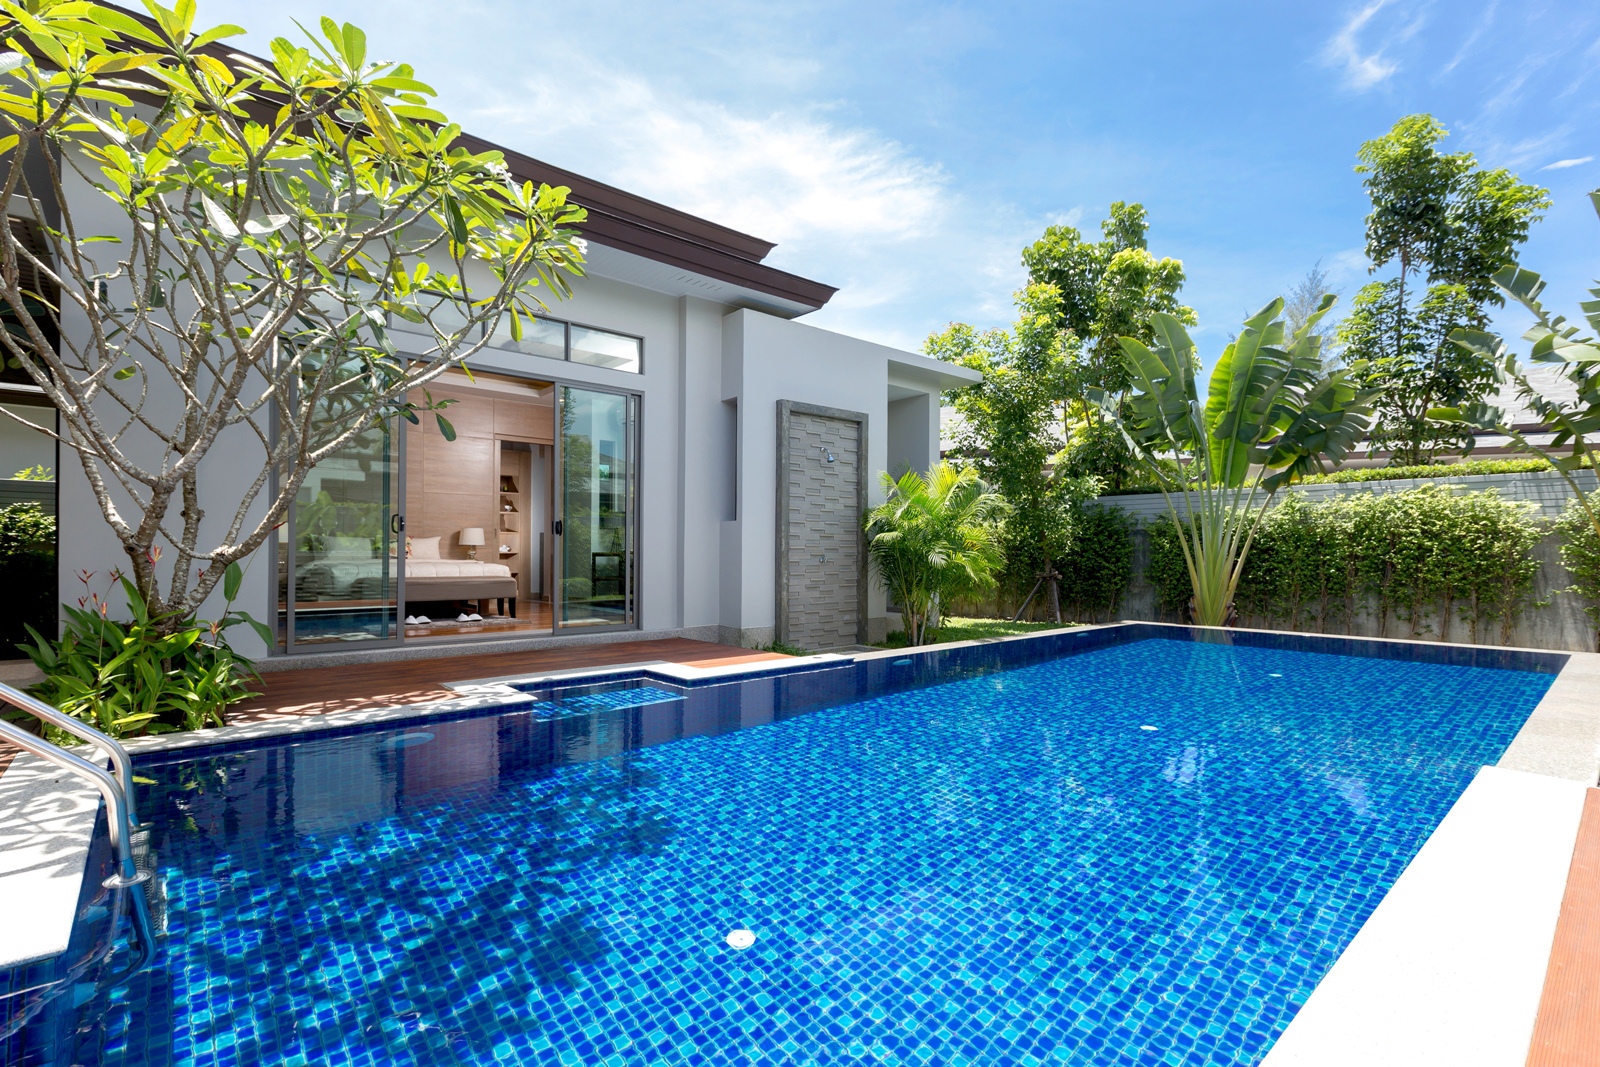 Villas located in one of Phuket’s most desirable locations